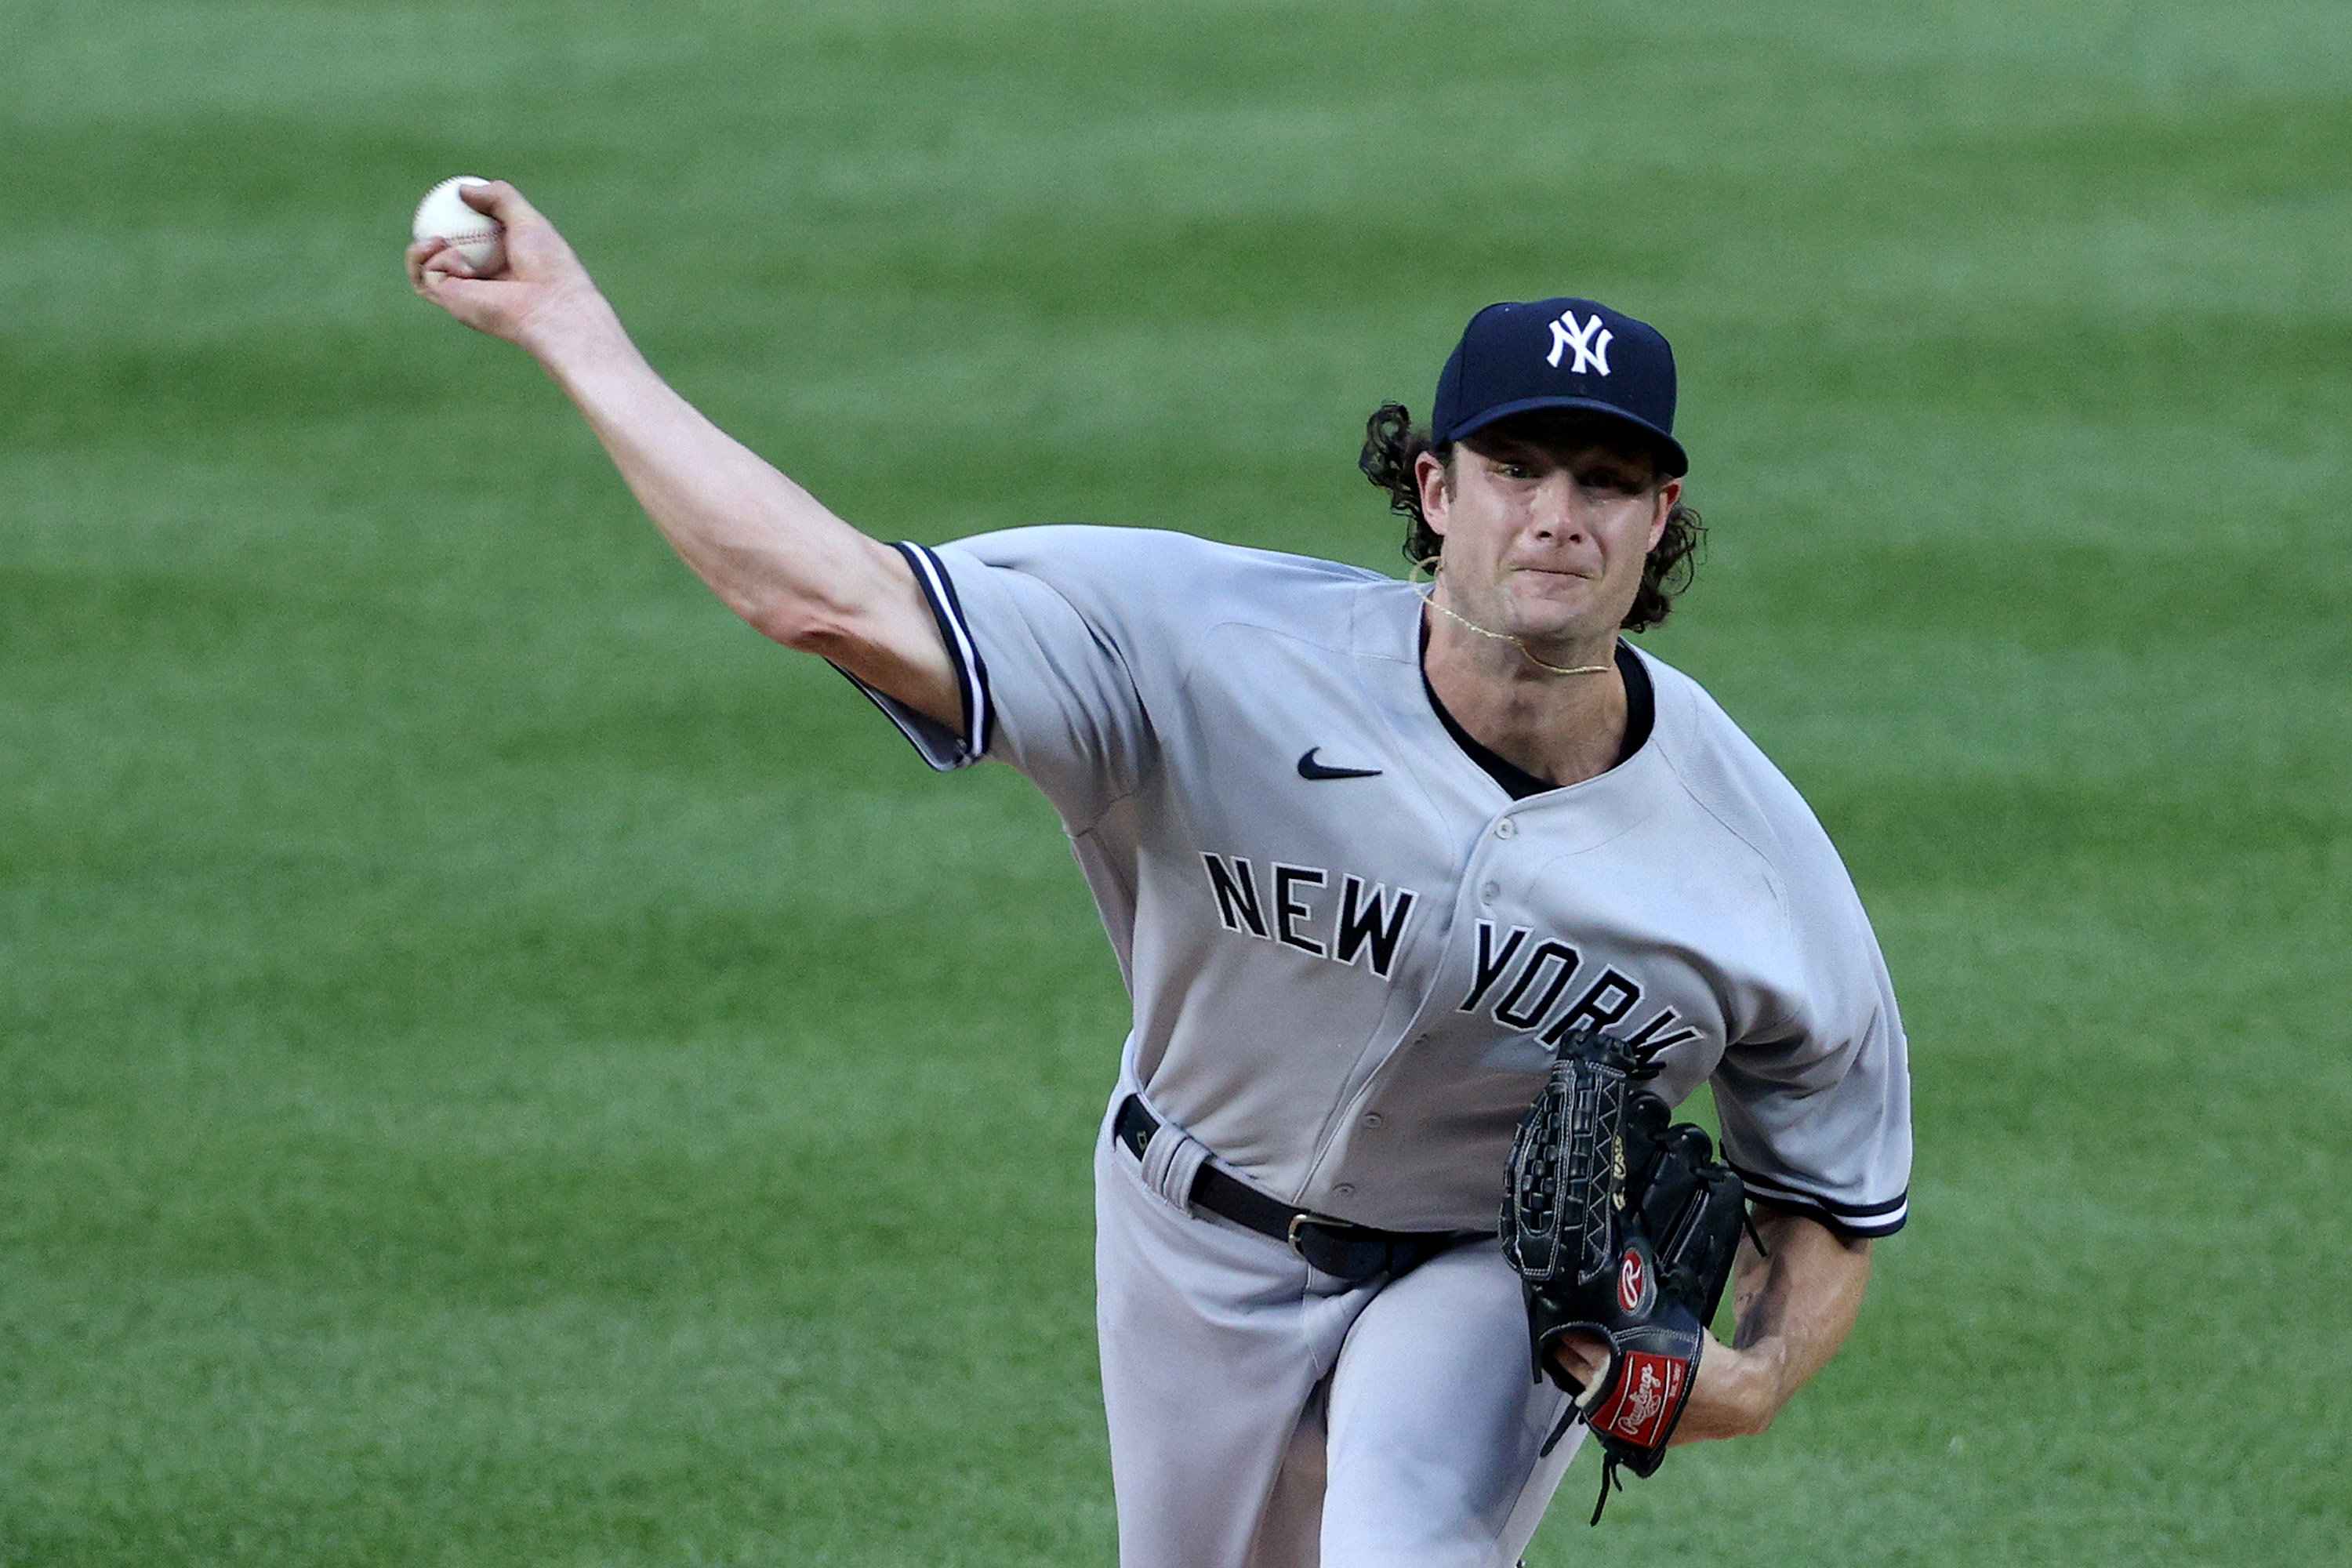 New York Yankees right-hander Gerrit Cole earned the win in his first start with the team.